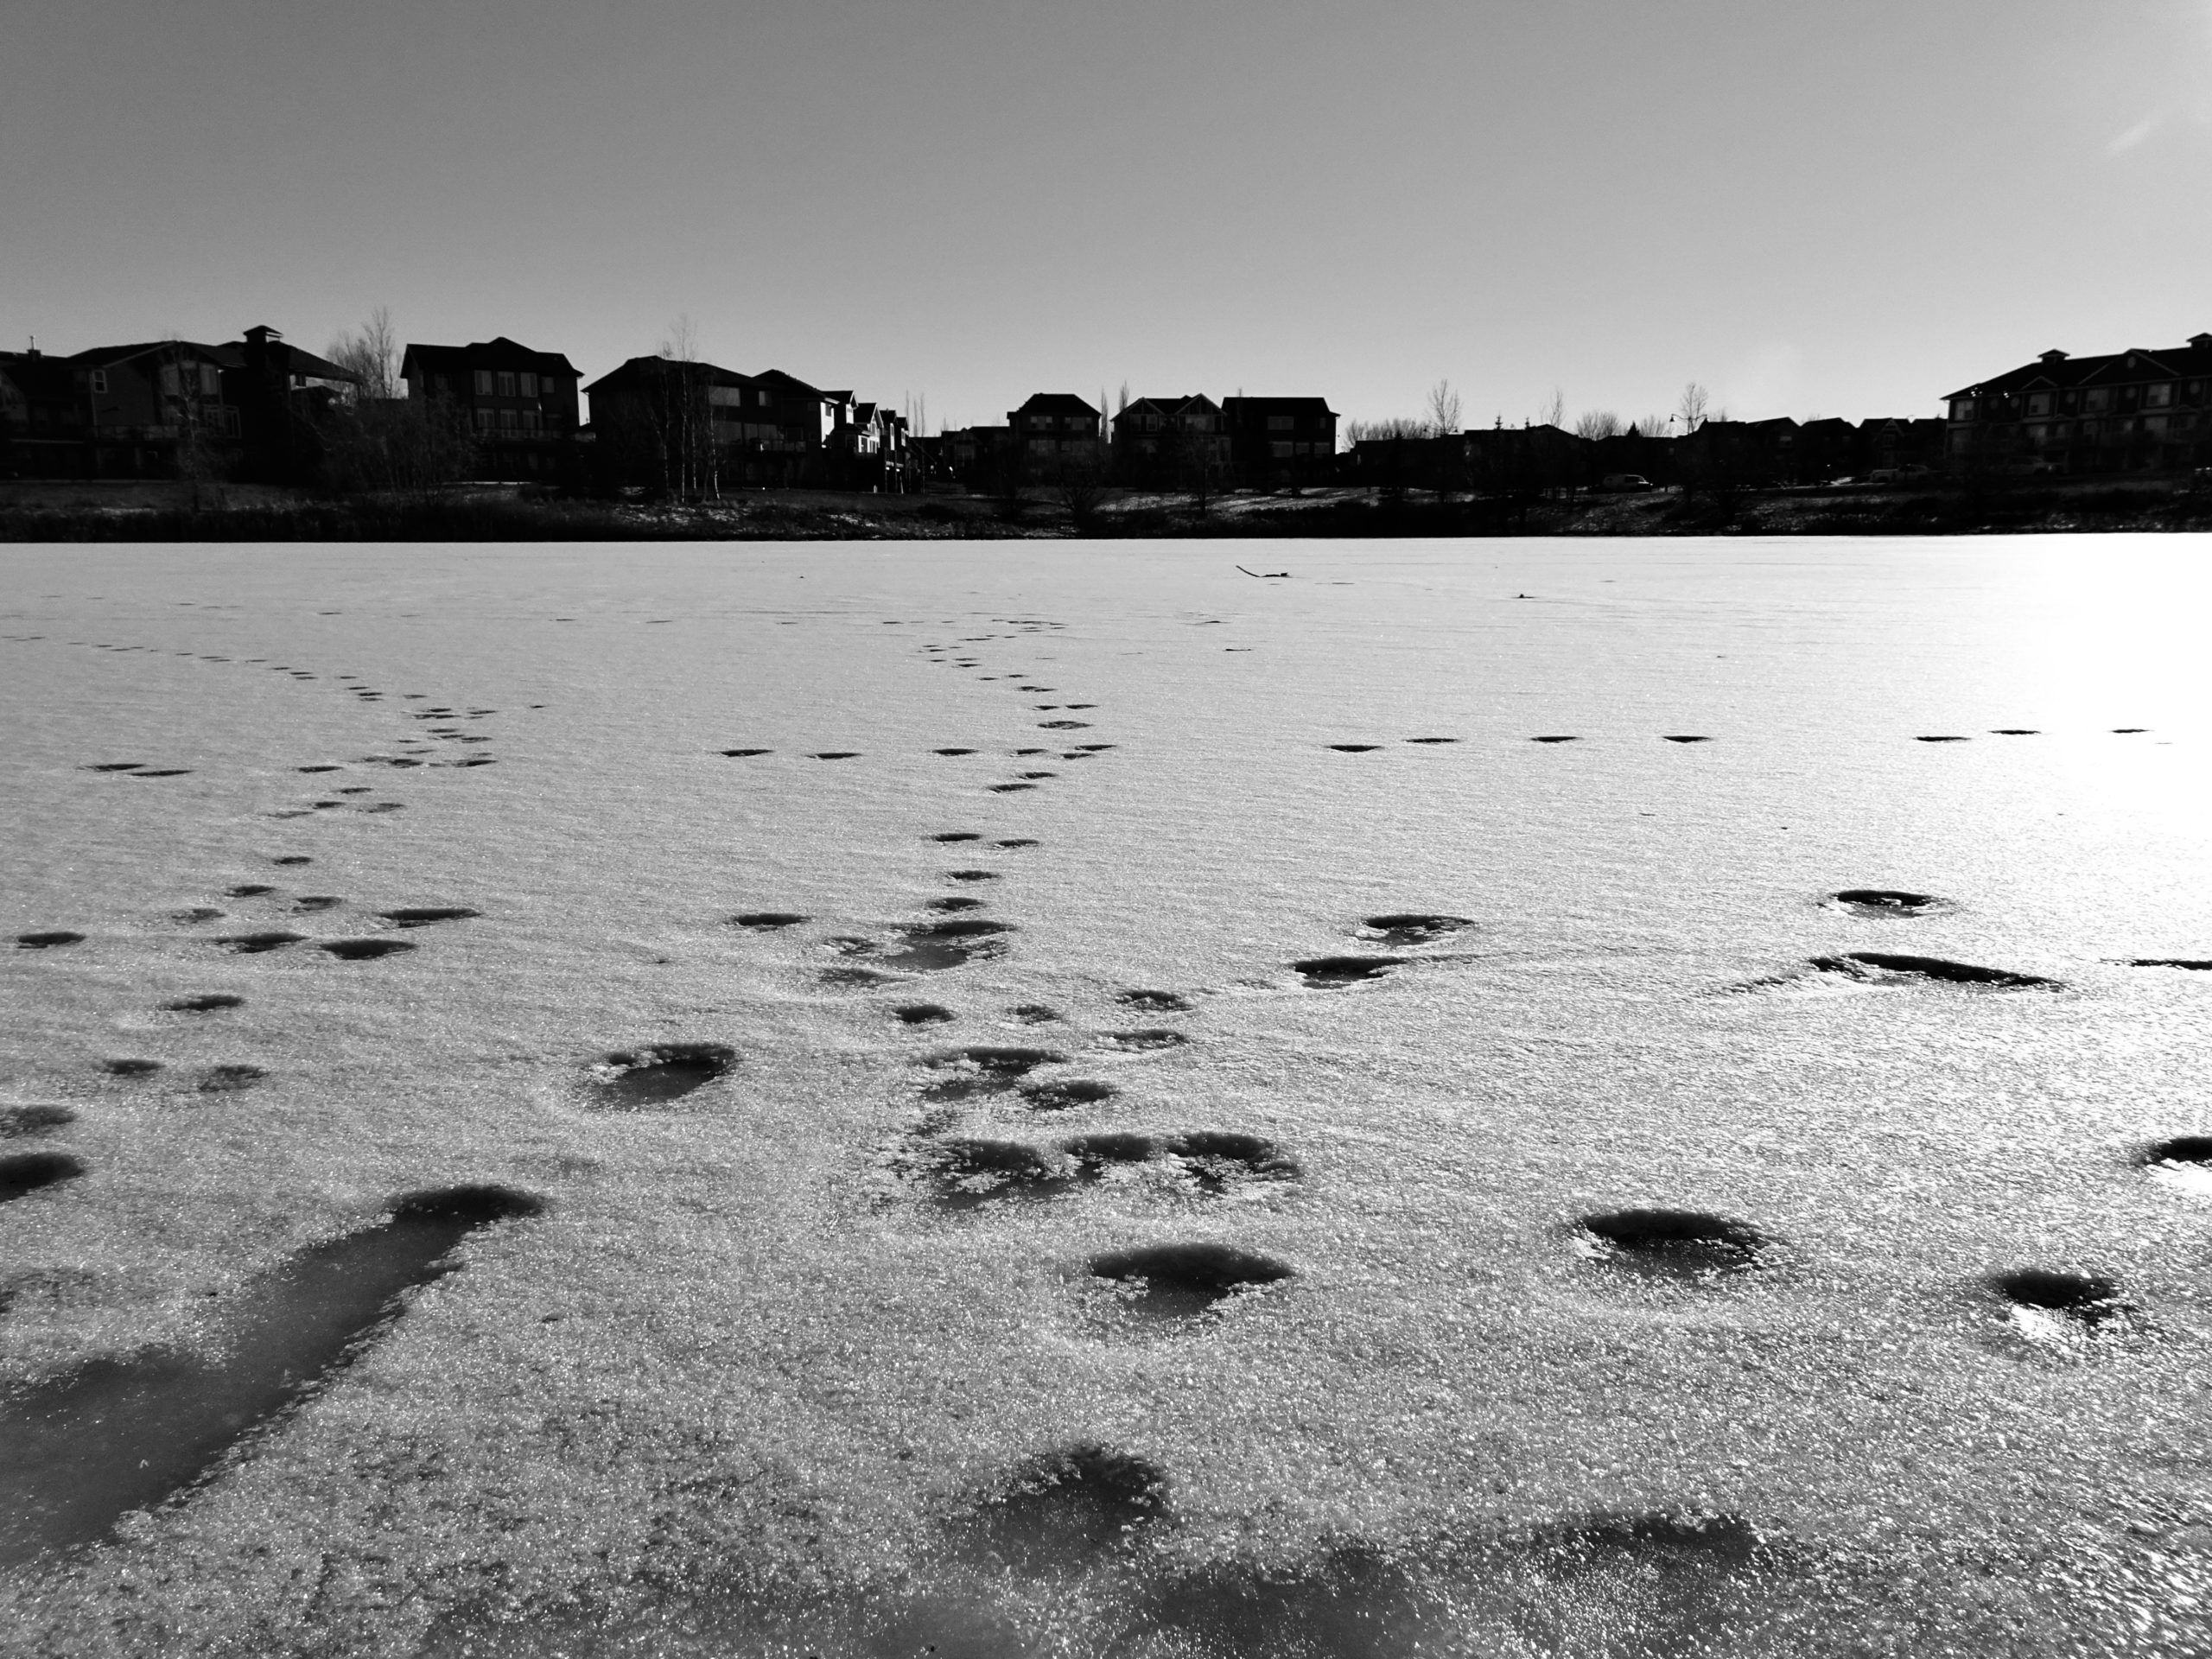 Image of the storm pond, with some animal tracks going across the thin ice.